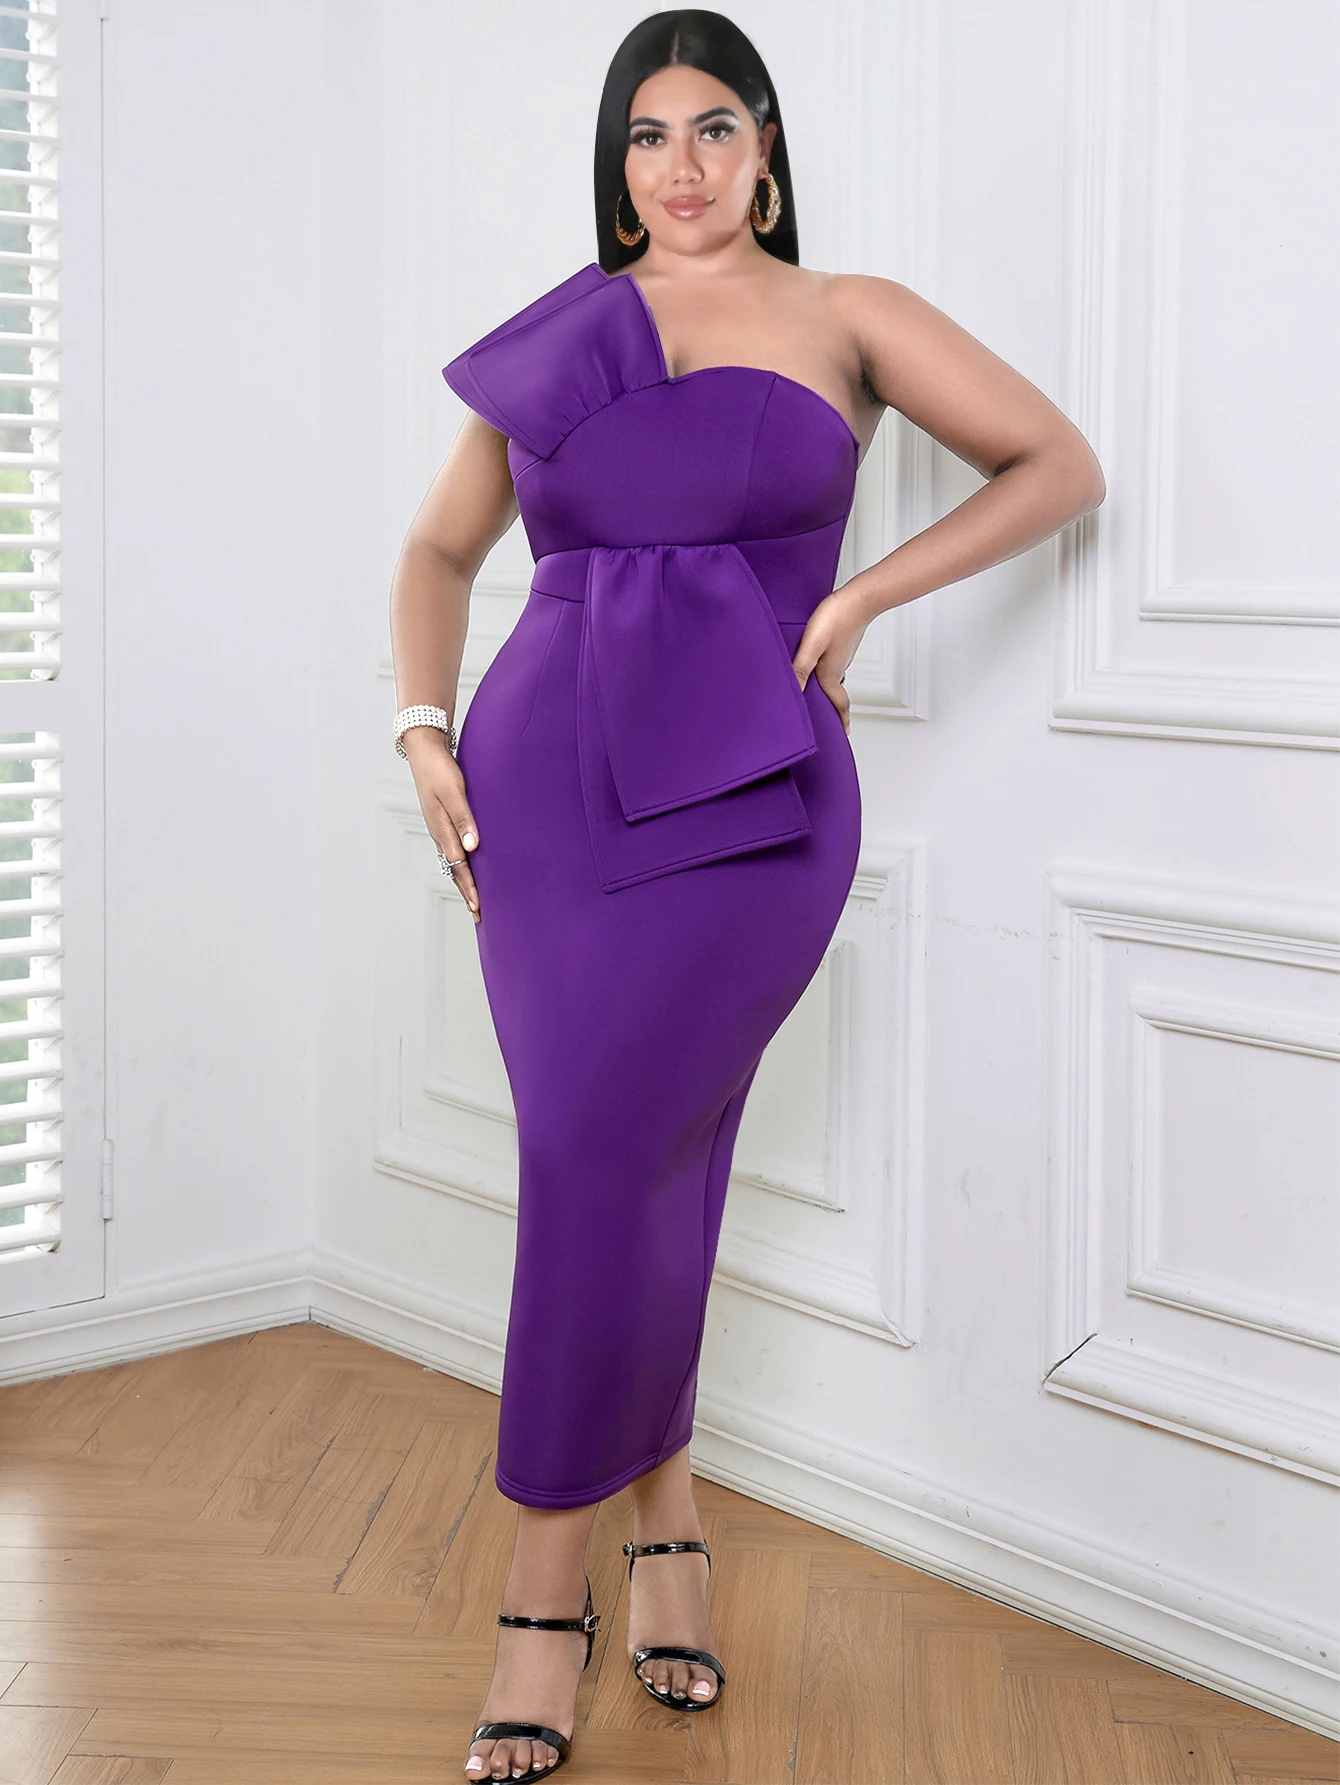 

Purple Dress for Women 2023 One Shoulder Large Size 3XL 4XL High Waist Bodycon Bowtie Evening Birthday Midi Event Party Outfits